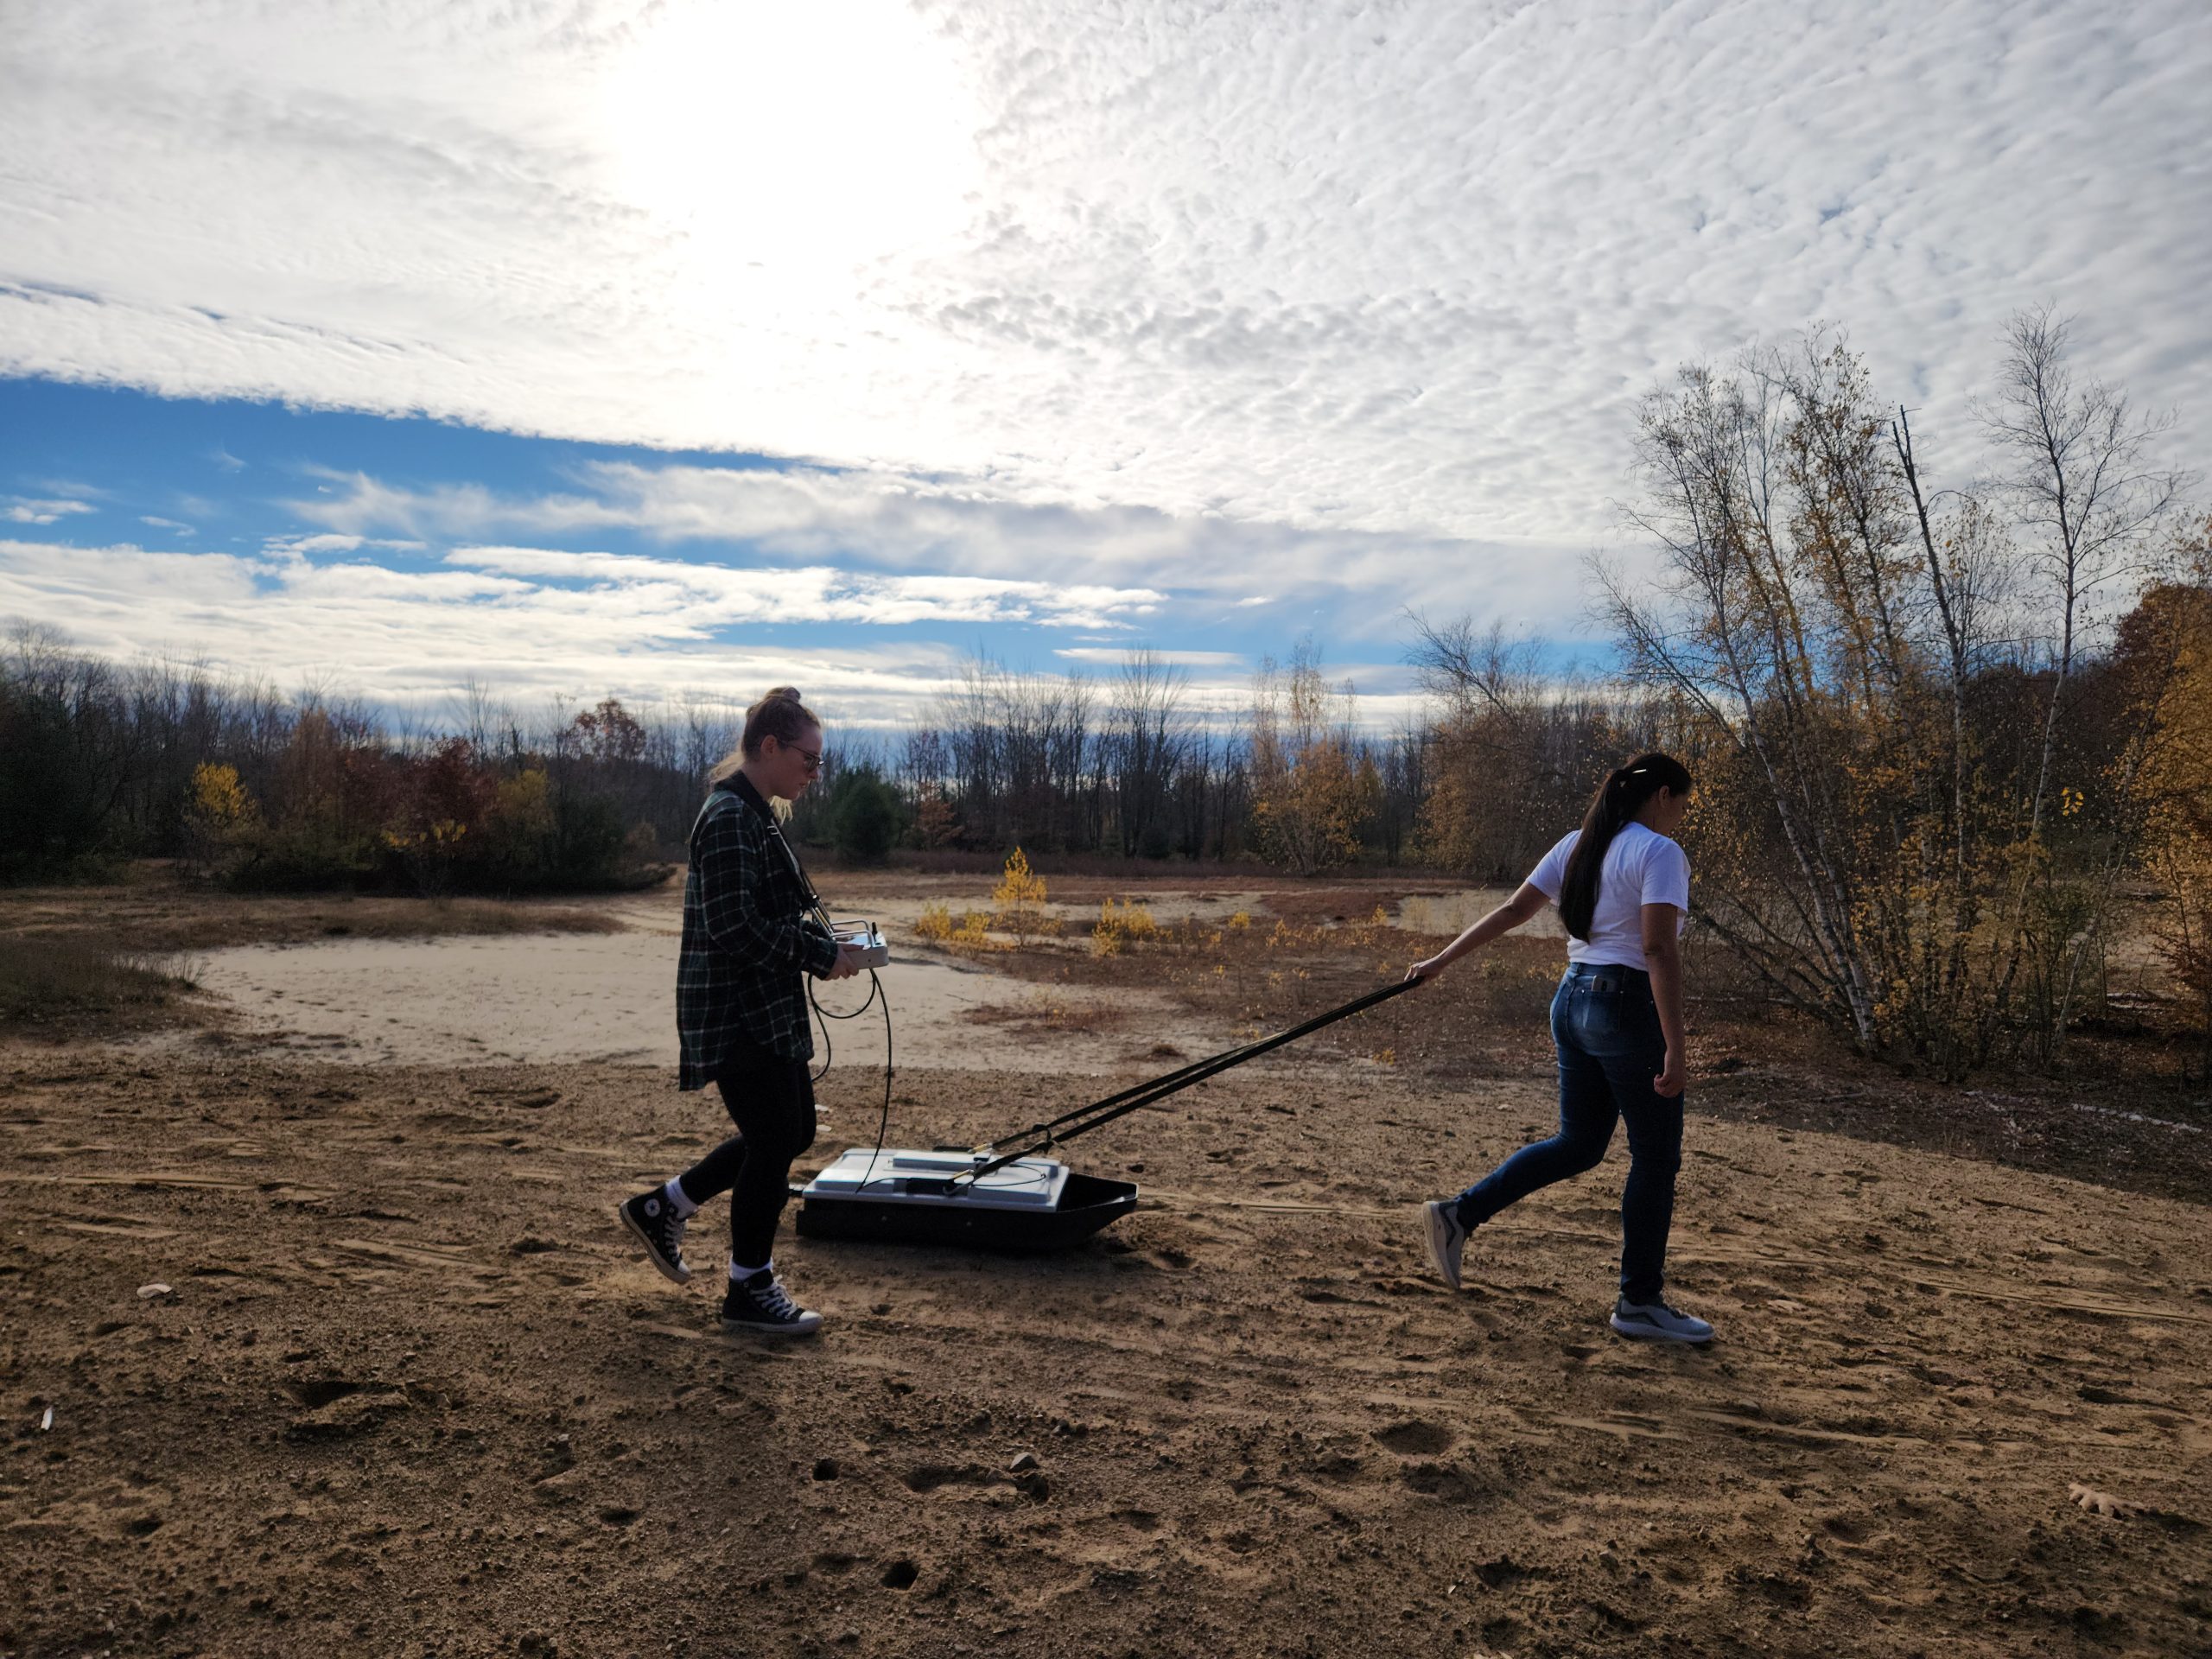 Gladys Pantoja, a Clarkson University PhD student, tows a GPR in Potsdam to explore ancient sand dunes which are remnants of the prehistoric Champlain Sea coastline.